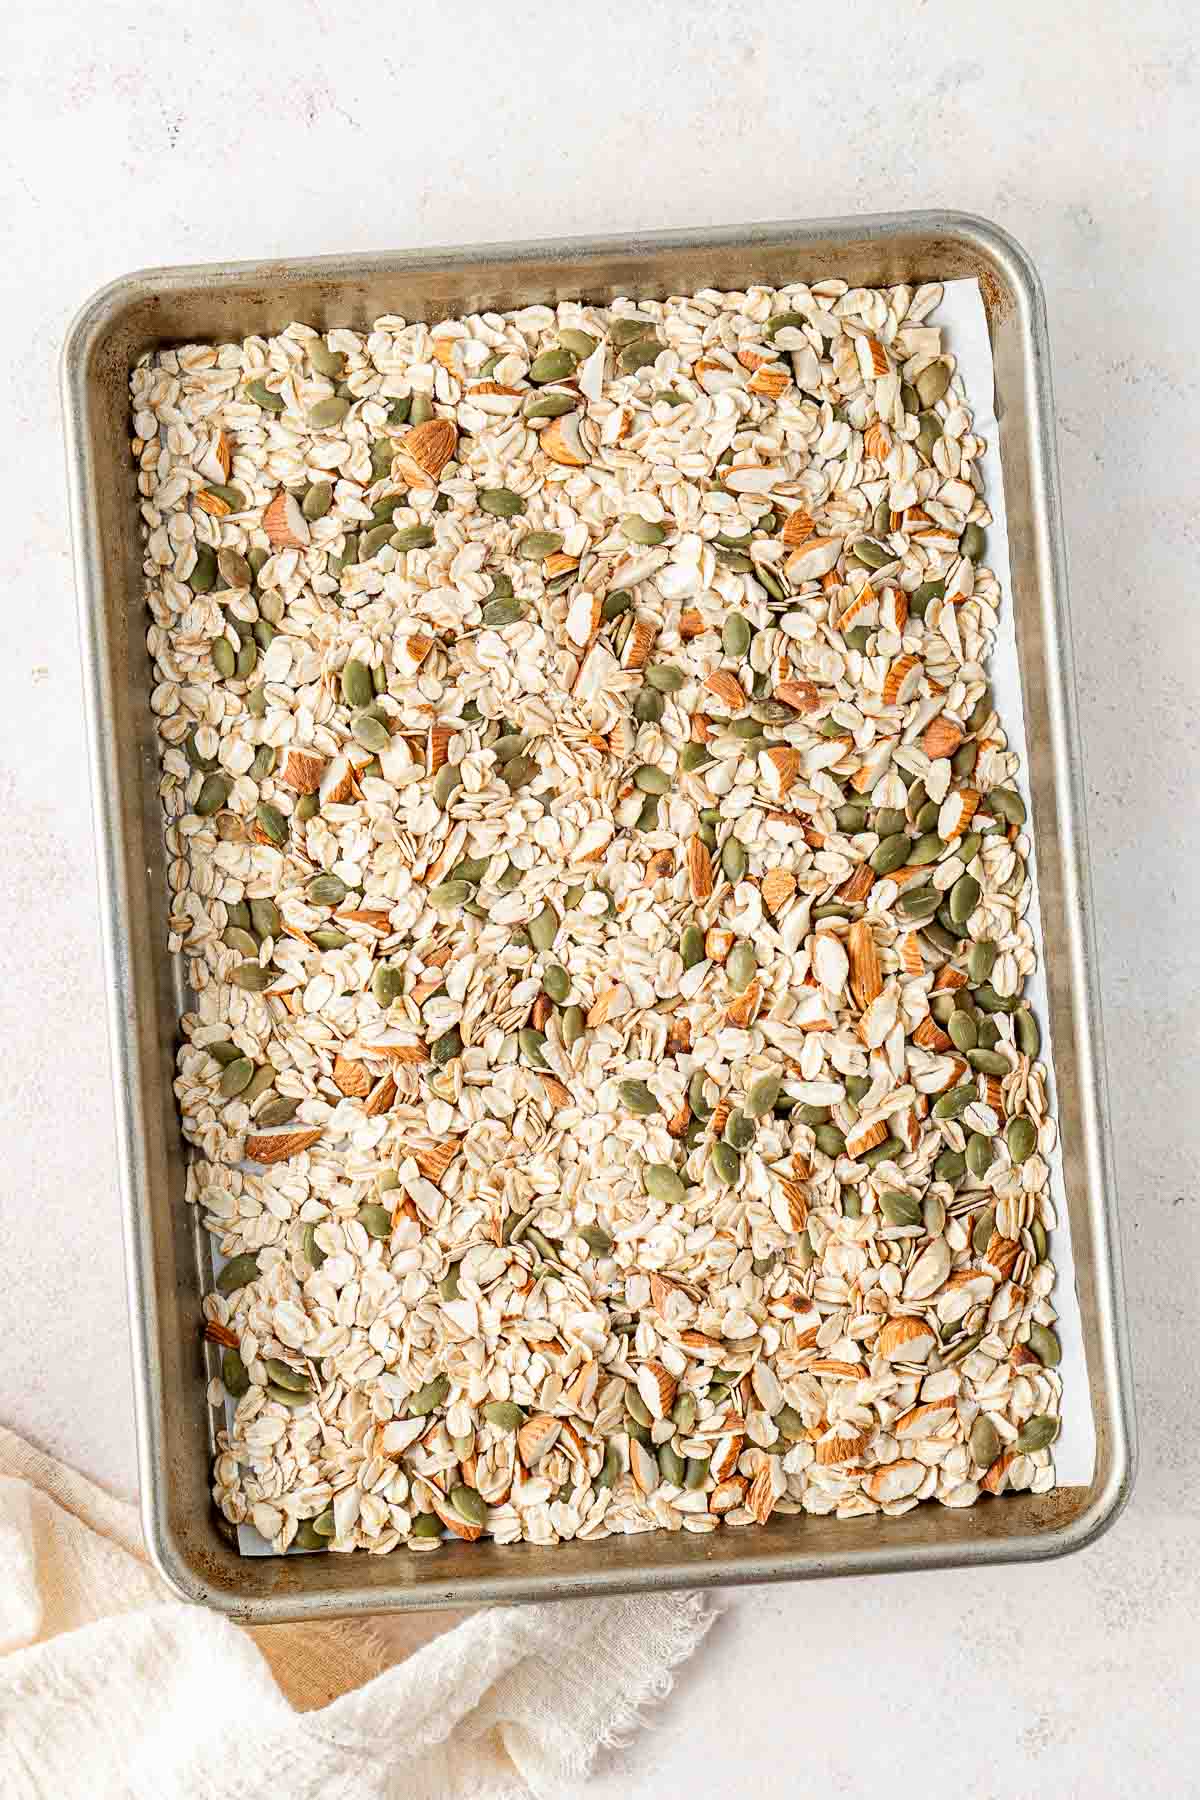 Rolled oats, chopped almonds and pepitas laid out on a baking tray to be toasted in the oven.